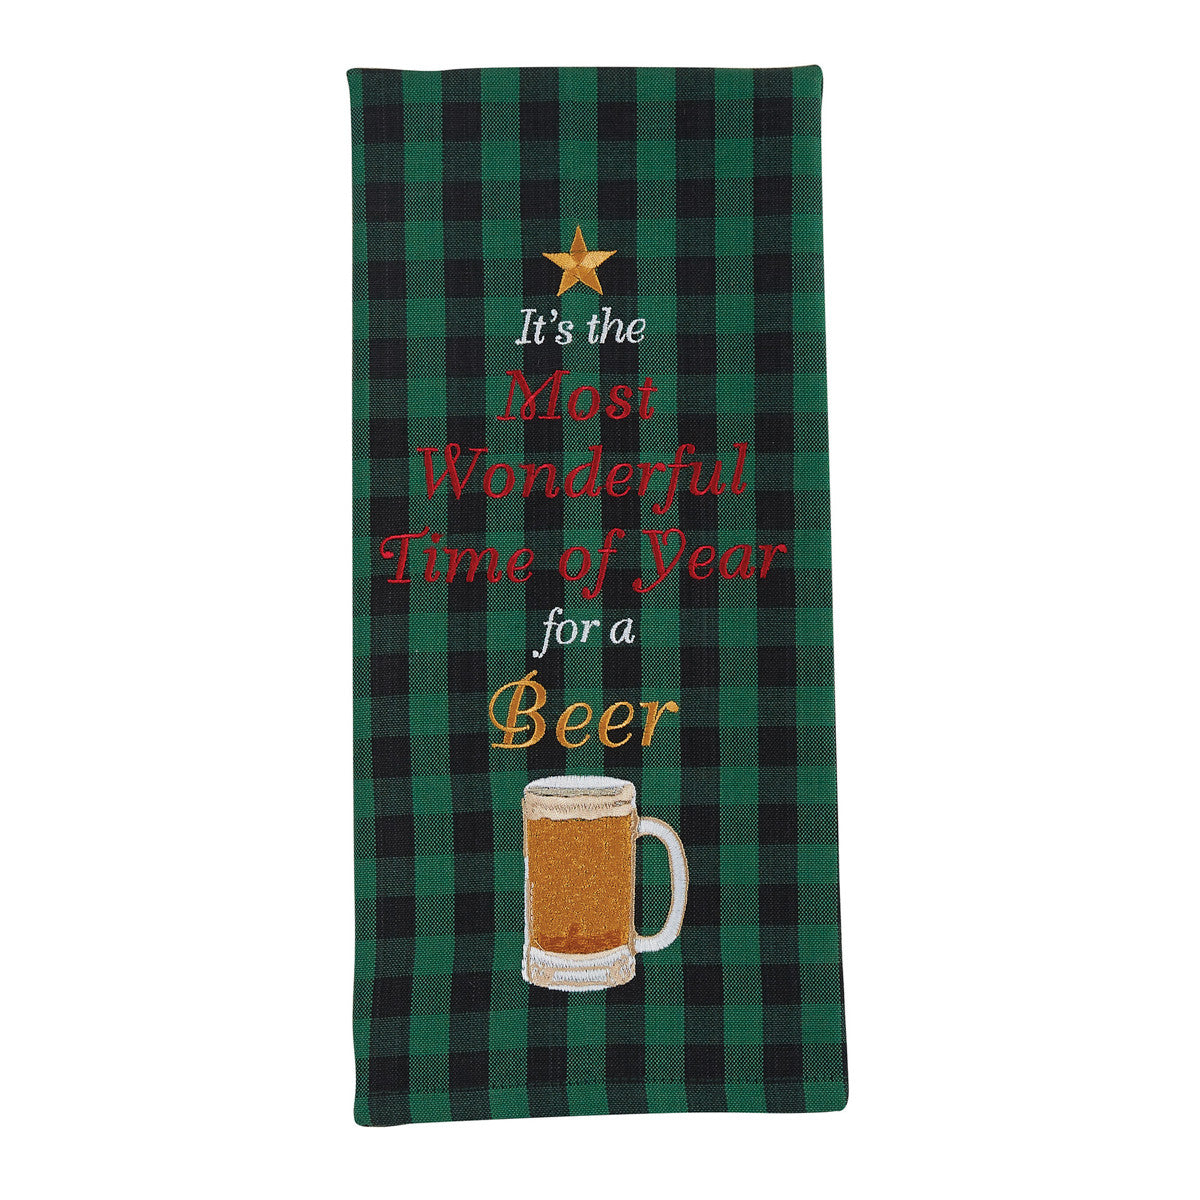 TIME FOR A BEER EMBROIDERED DISHTOWEL